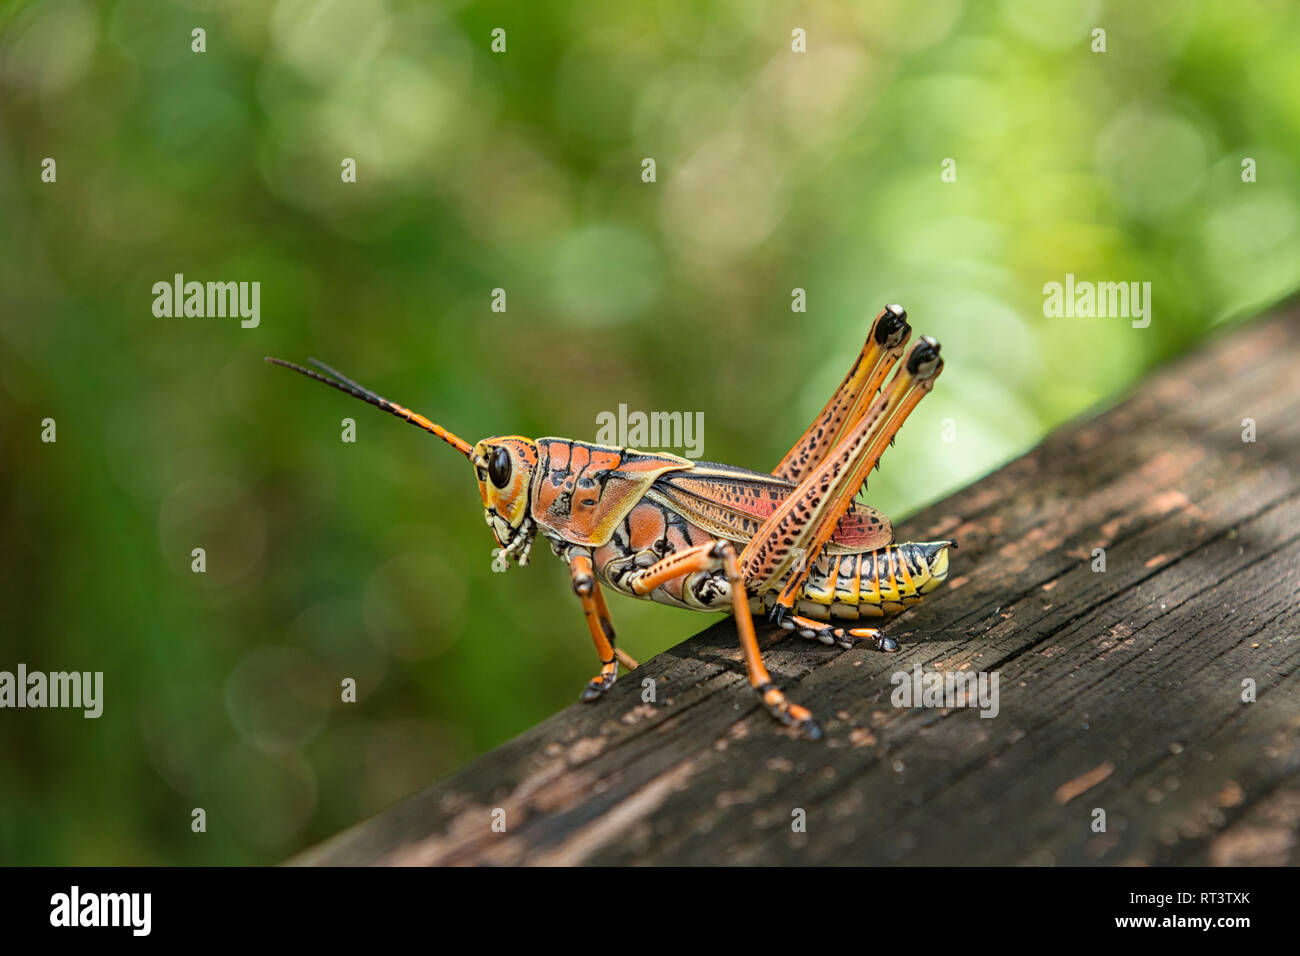 United States of America, Florida, Everglades, Copeland,  Lubber Grasshopper (Romalea microptera) on a tree trunk in the Fakahatchee Strand Preserve S Stock Photo